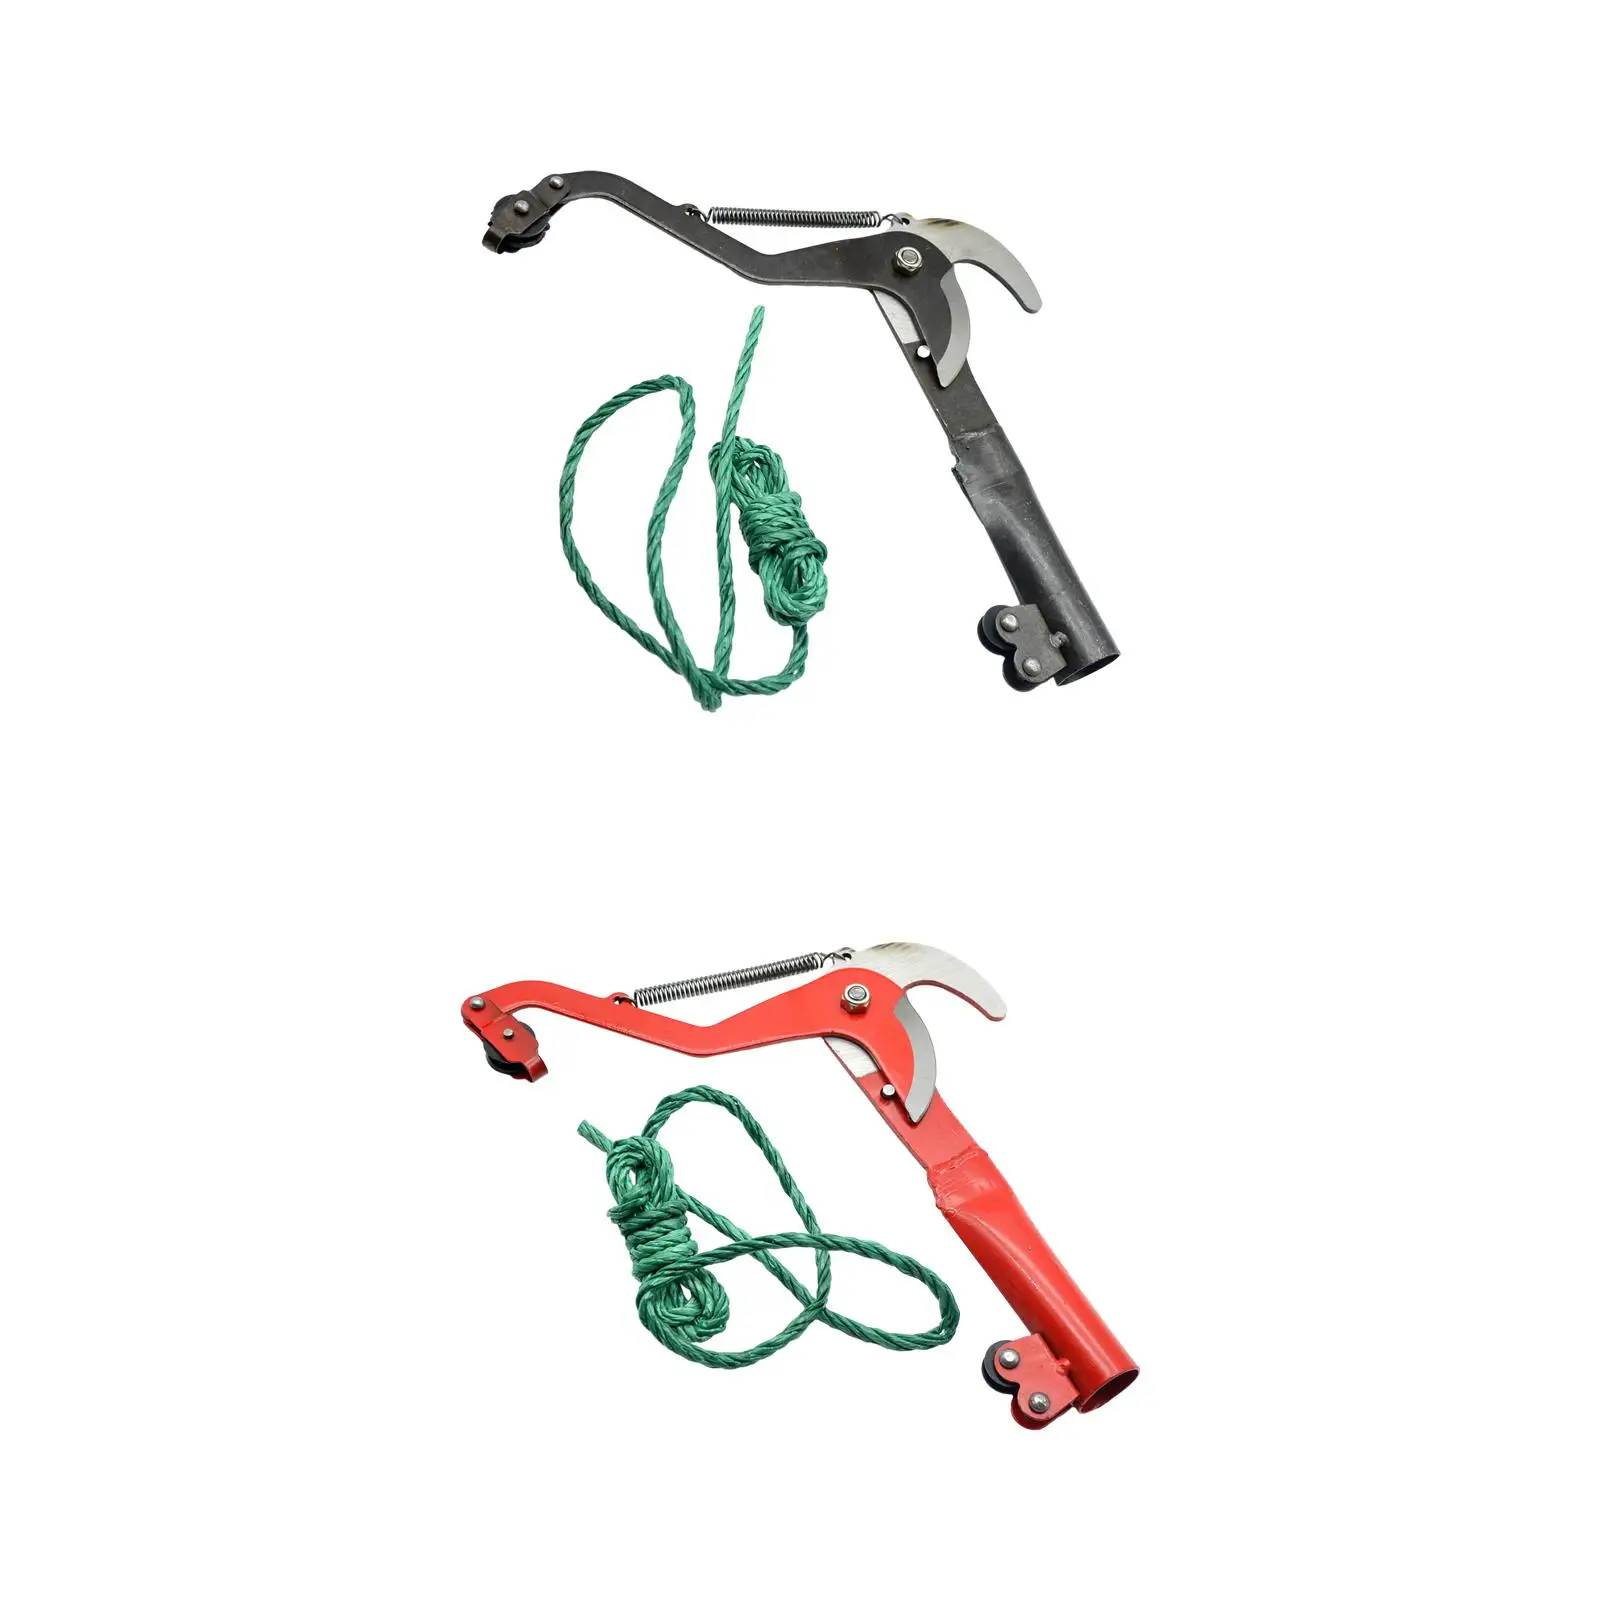 High Altitude Pruning Shear Professional with Rope Garden Tools Garden Shear for Garden Agricultural Cutting Branches